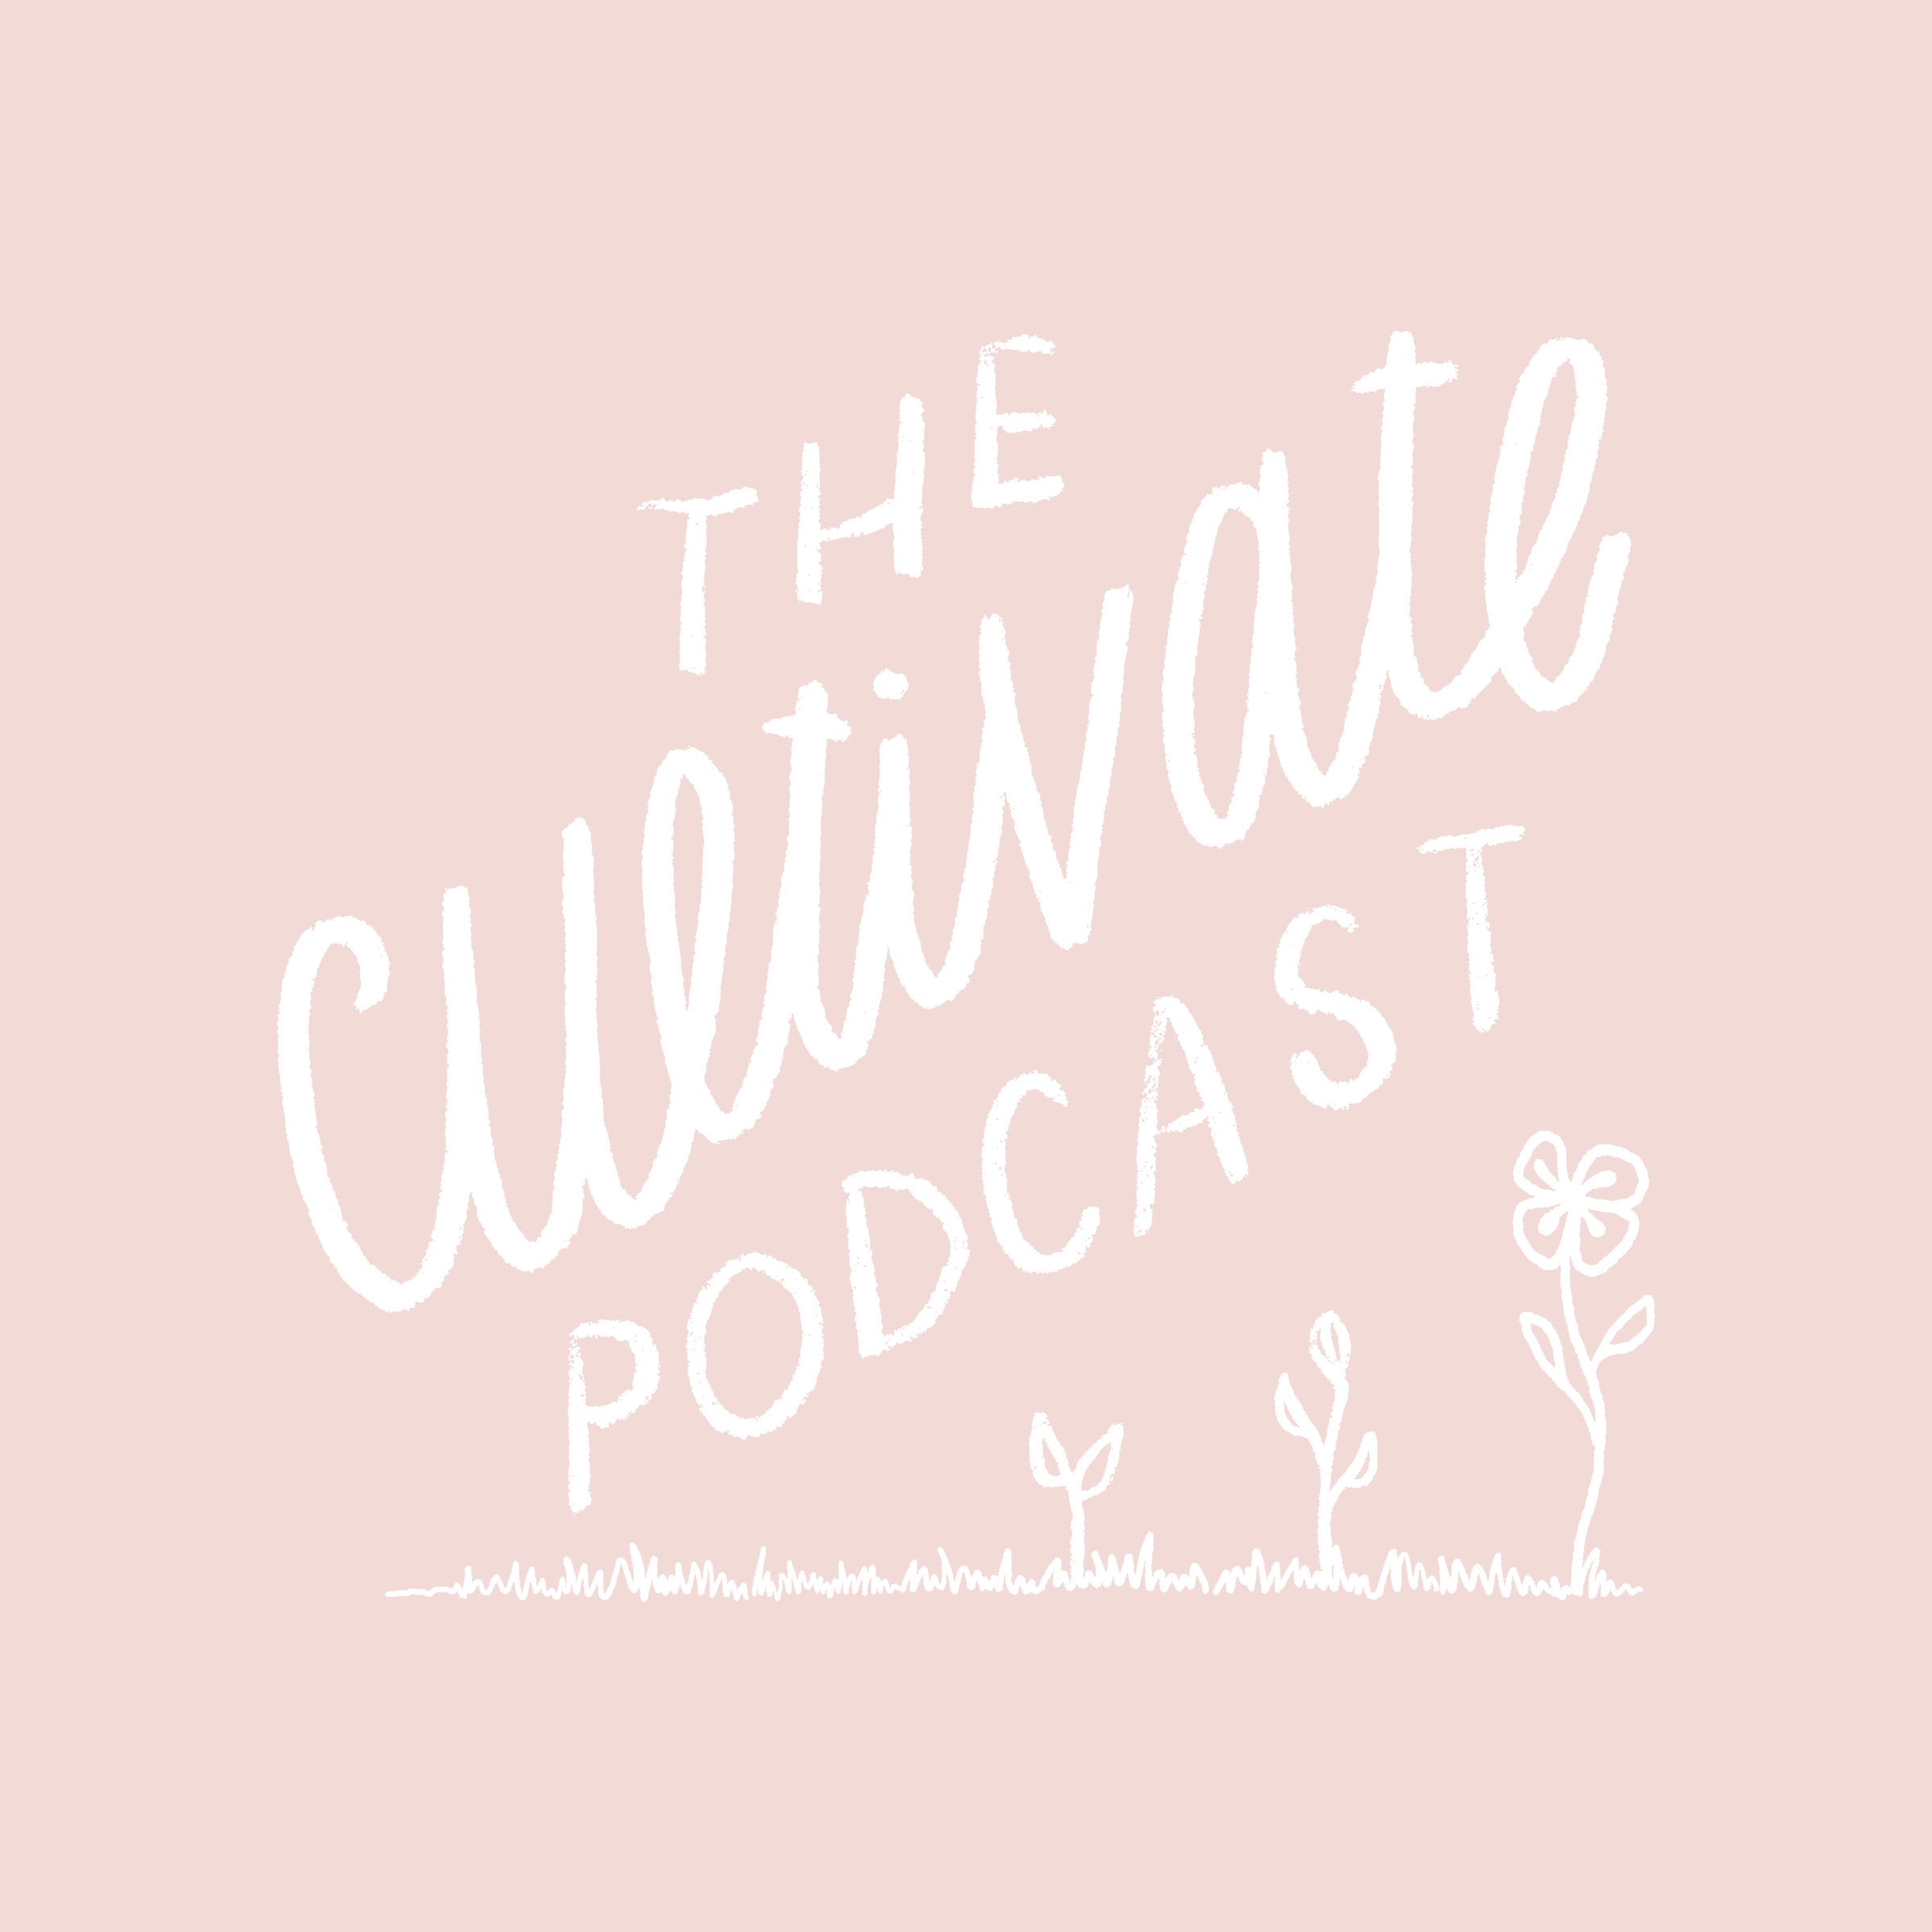 The Cultivate Podcast